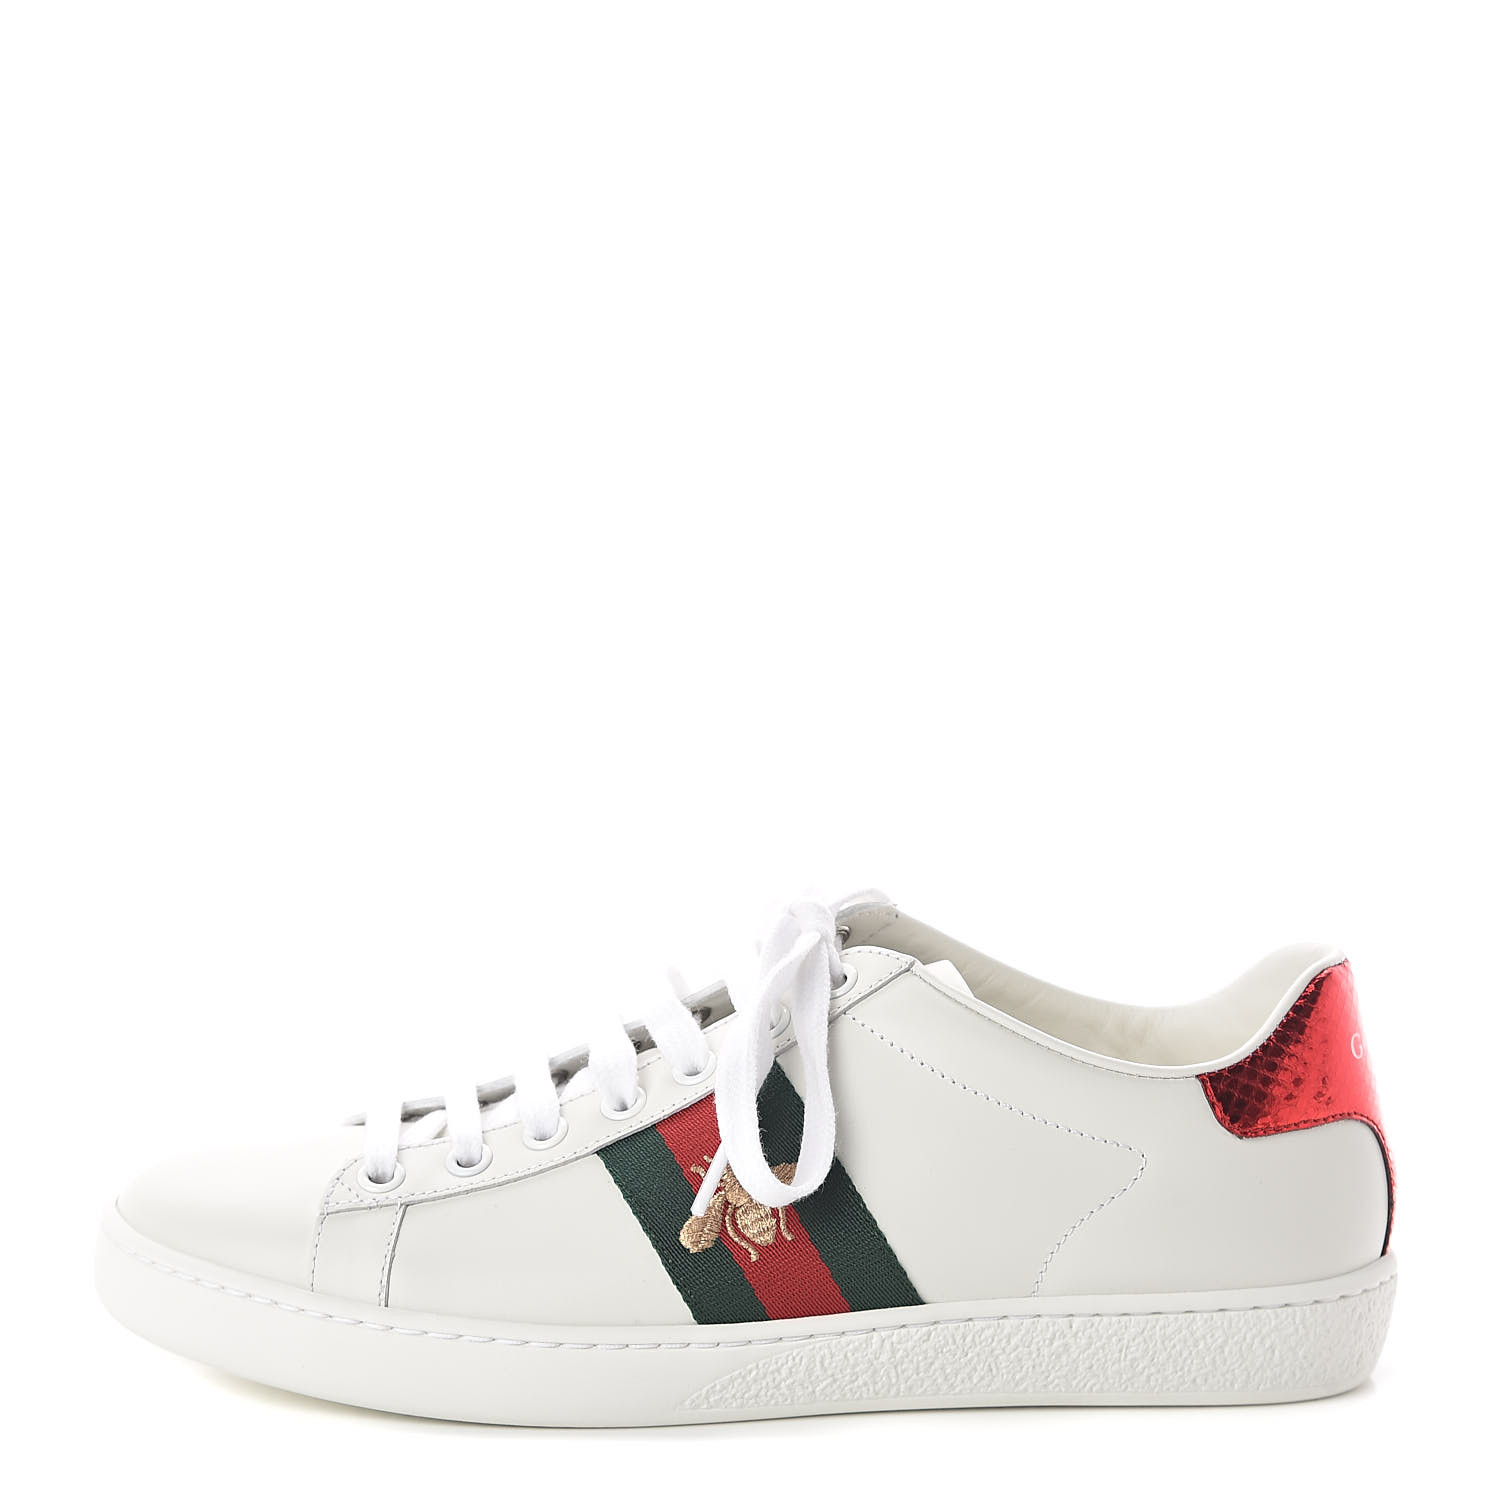 GUCCI Ayers Embroidered Ace Bee Star Sneakers 37 White Green 526319